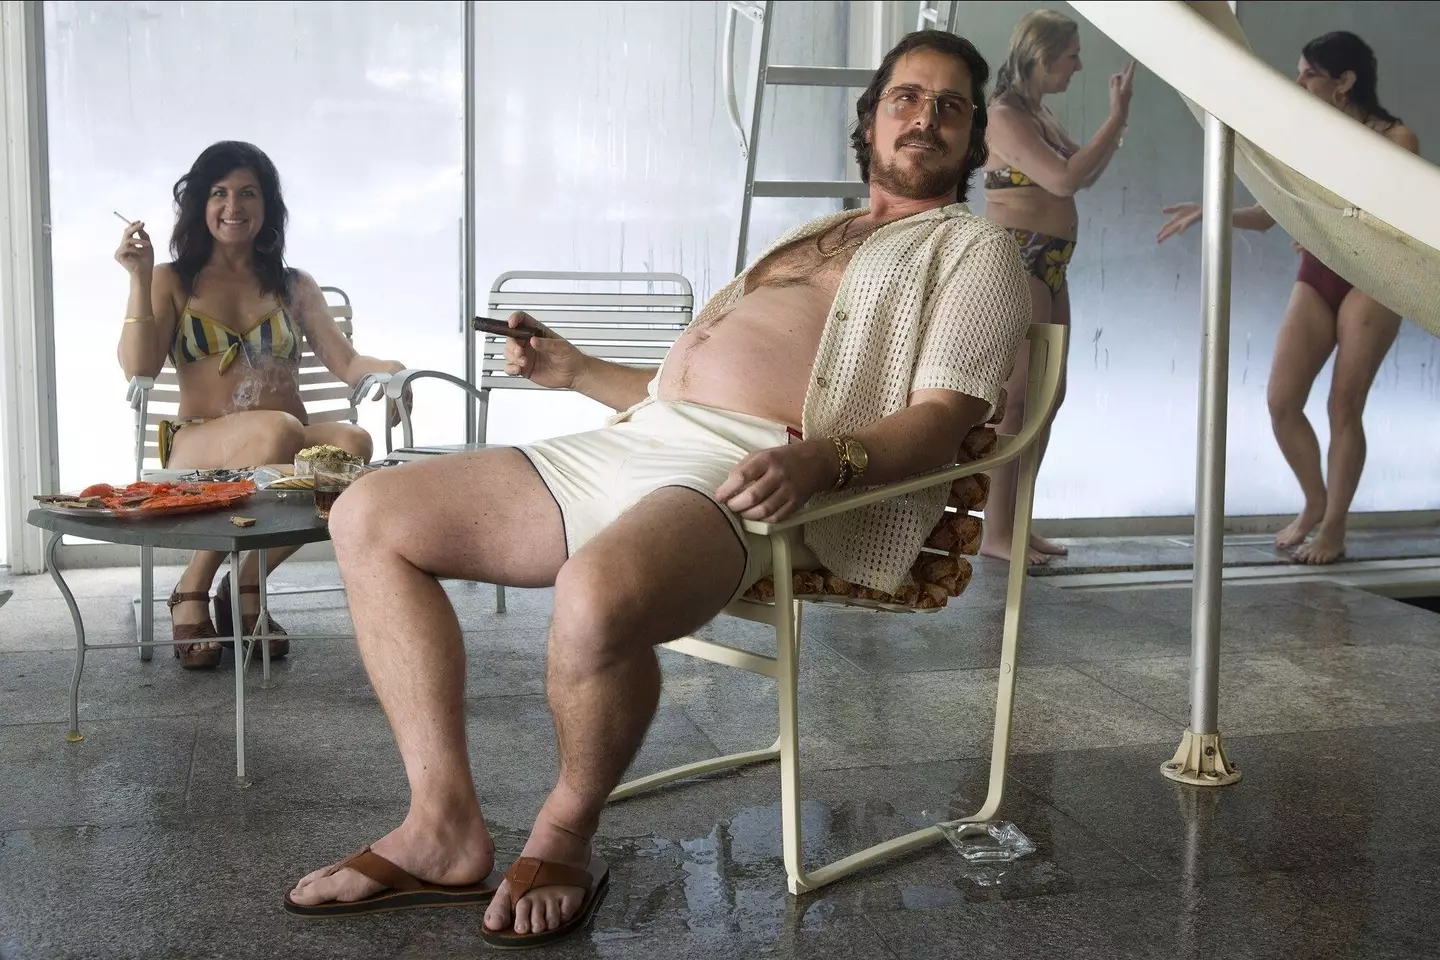 He suffered from a herniated disk after gaining weight for American Hustle.